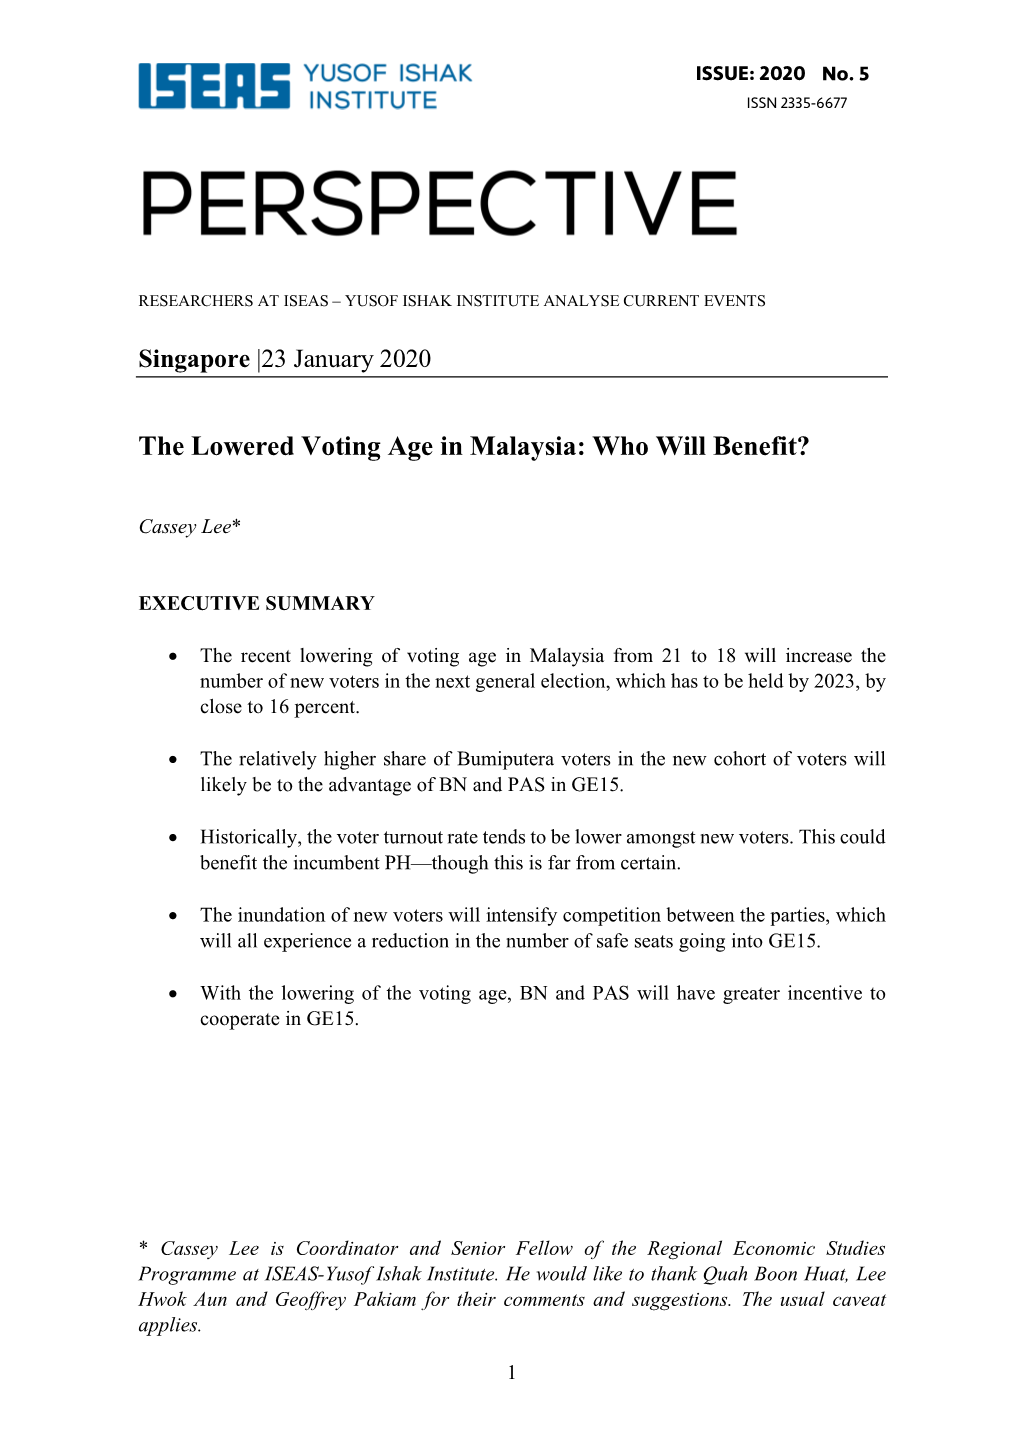 The Lowered Voting Age in Malaysia: Who Will Benefit?